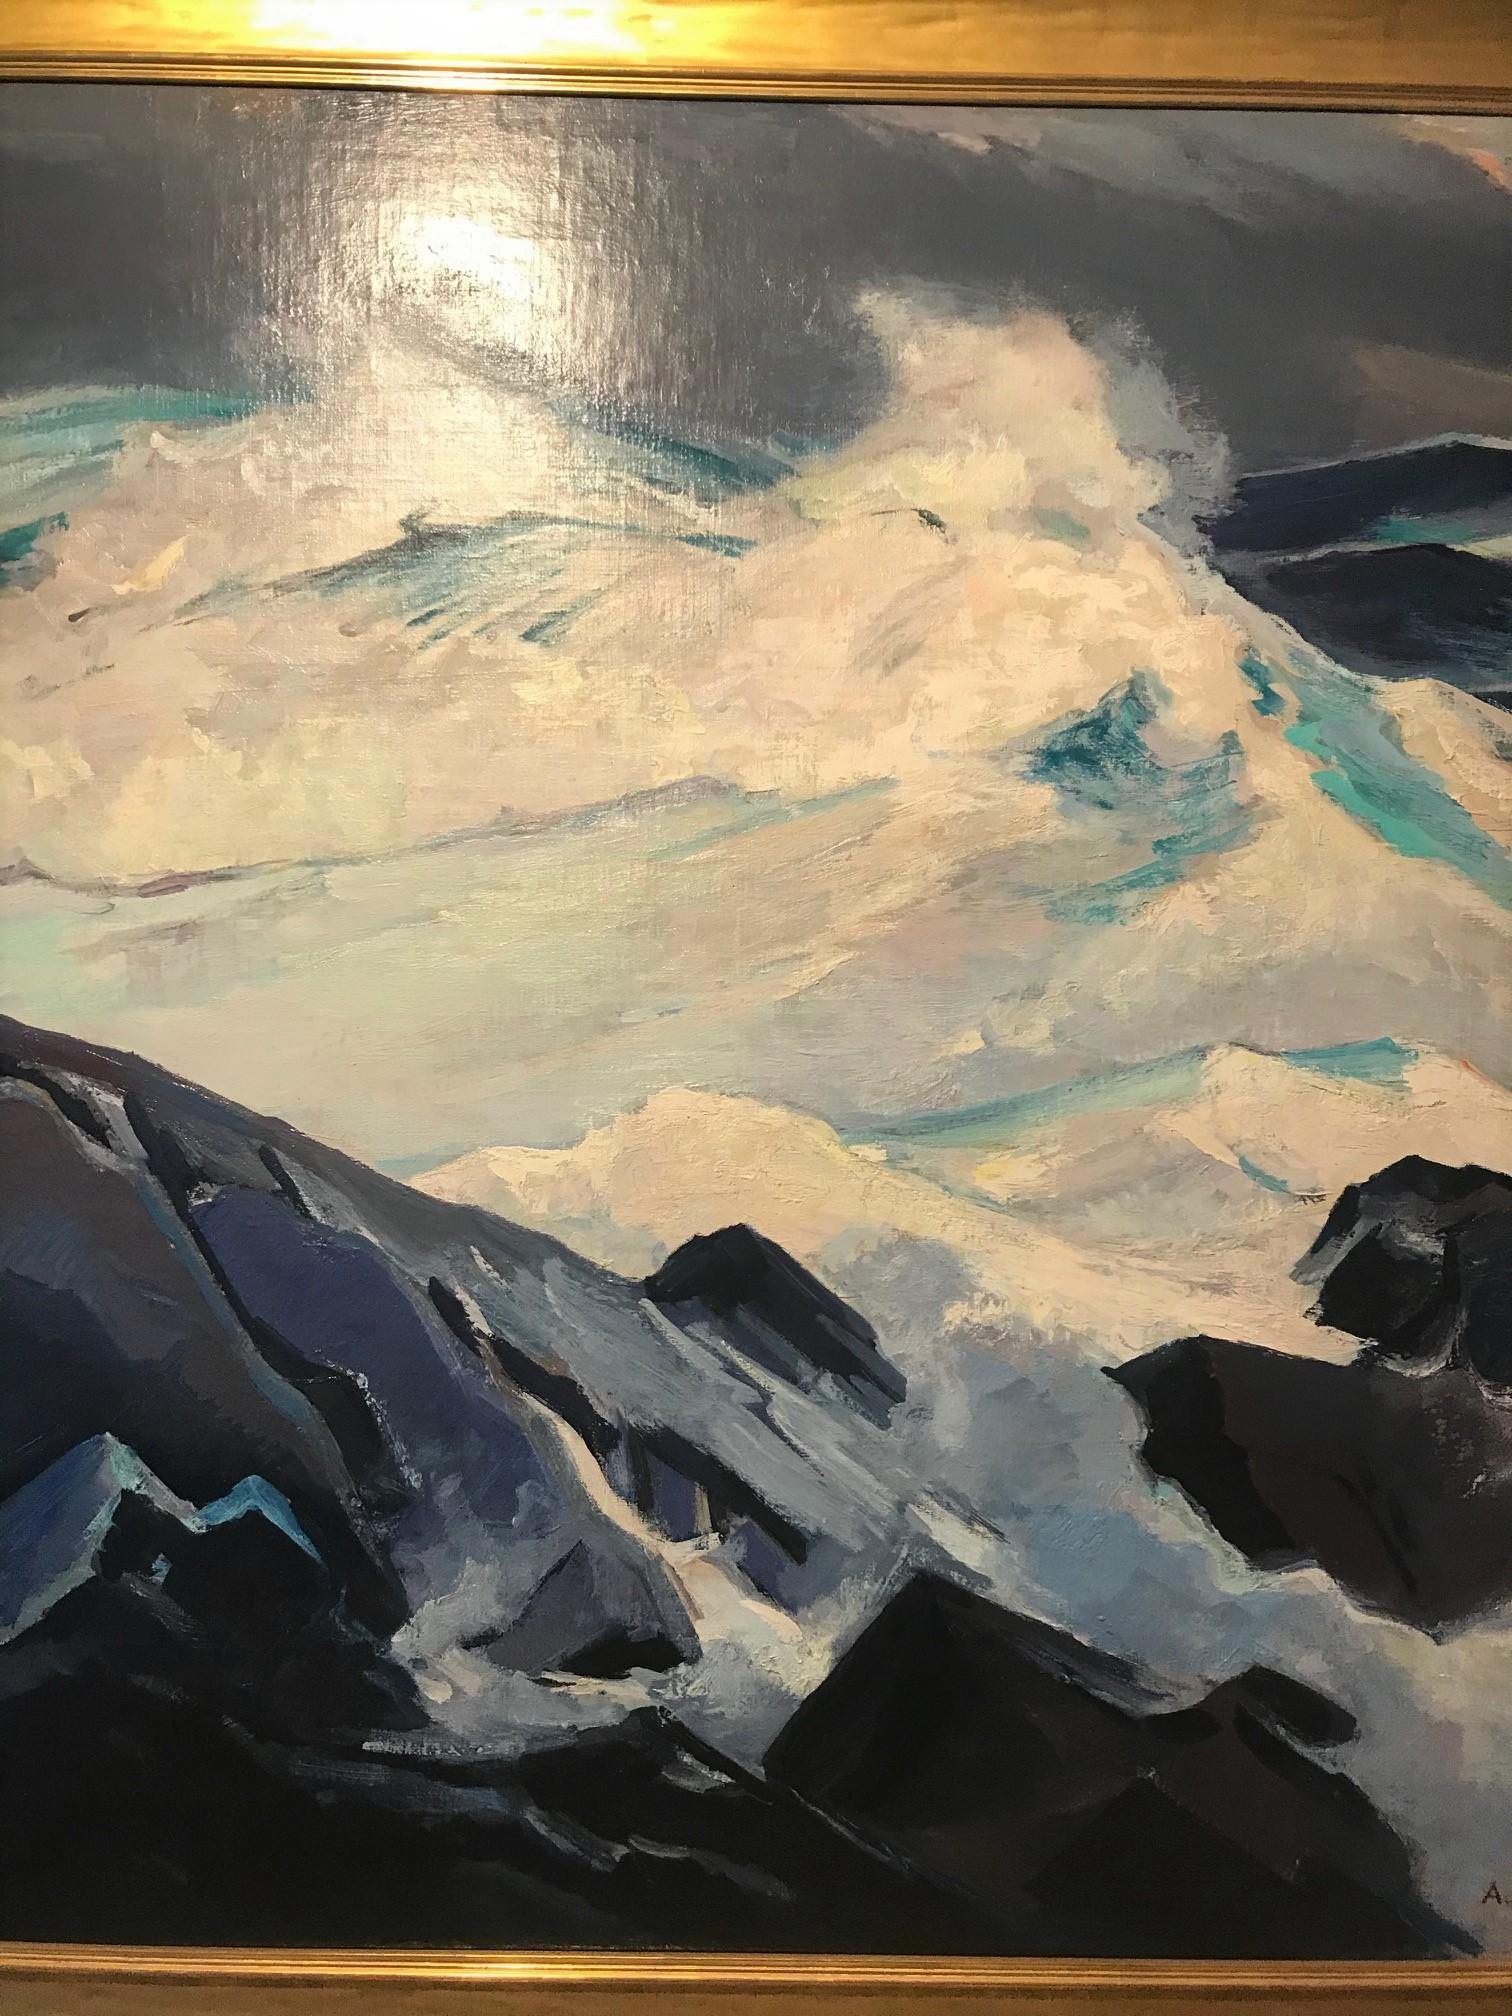 This painting is by Abraham Jacob Bogdanove
 Russian/American, 1887-1946 and is titled
The Squall, Monhegan, 1943
Signed A. J. Bogdanove and dated 1943 (lr); inscribed The Squall #213 on the stretcher
Oil on canvas
40 x 50 inches
48 x 57 3/4